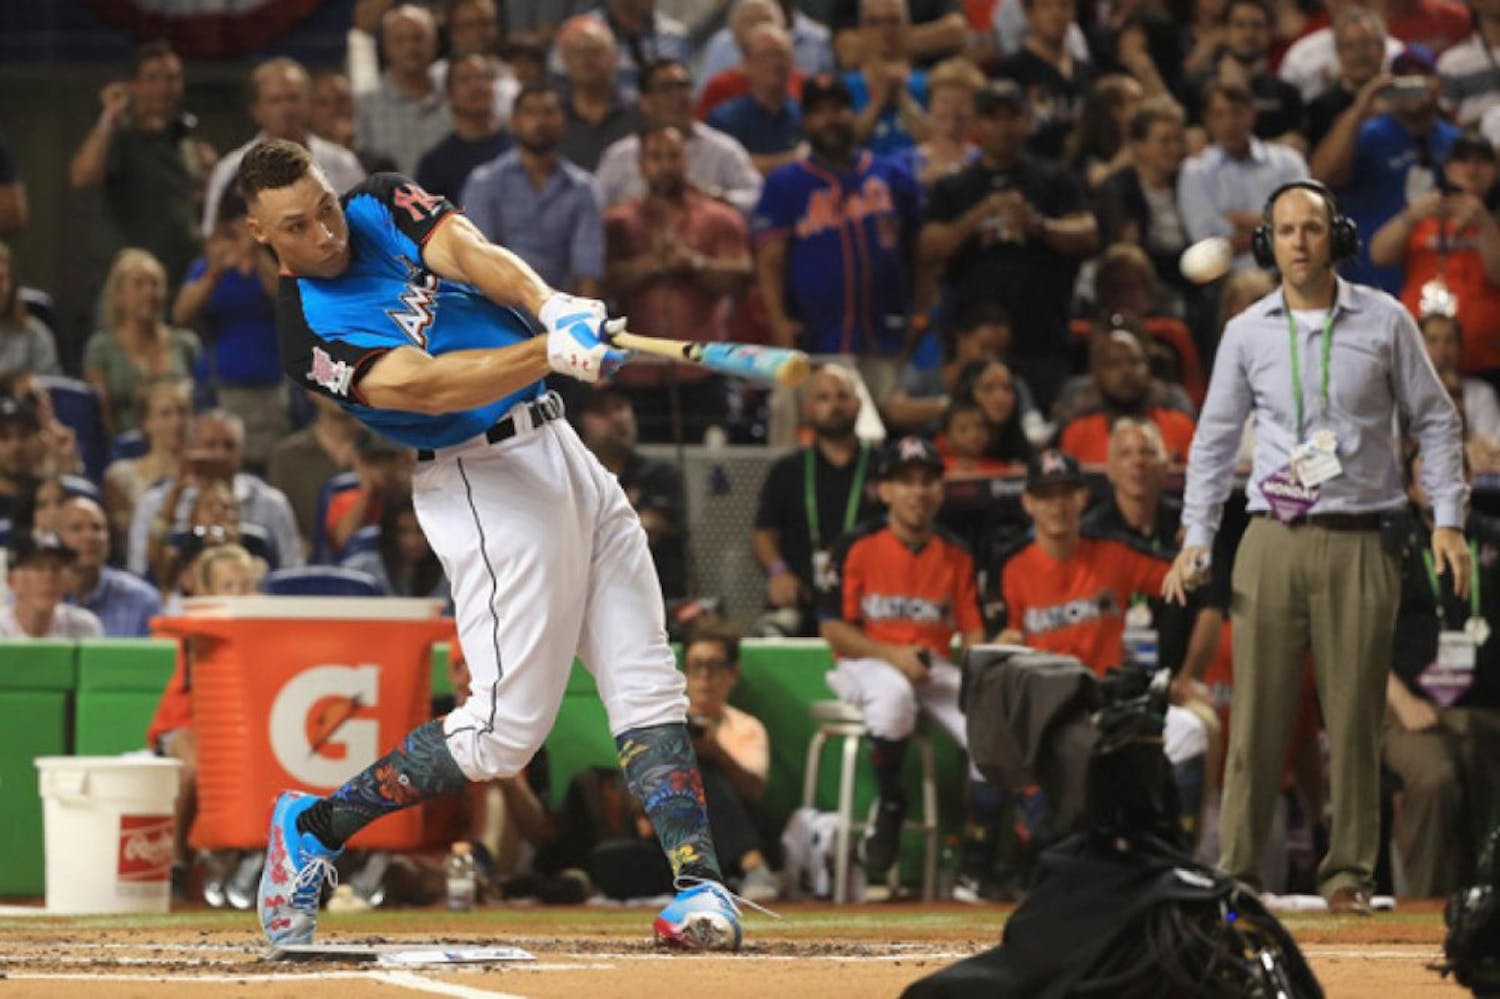 Yankees outfielder Aaron Judge swings during the 2017 MLB Home Run Derby on Monday night in Miami. Judge hit 47 home runs over three rounds to win the competition.